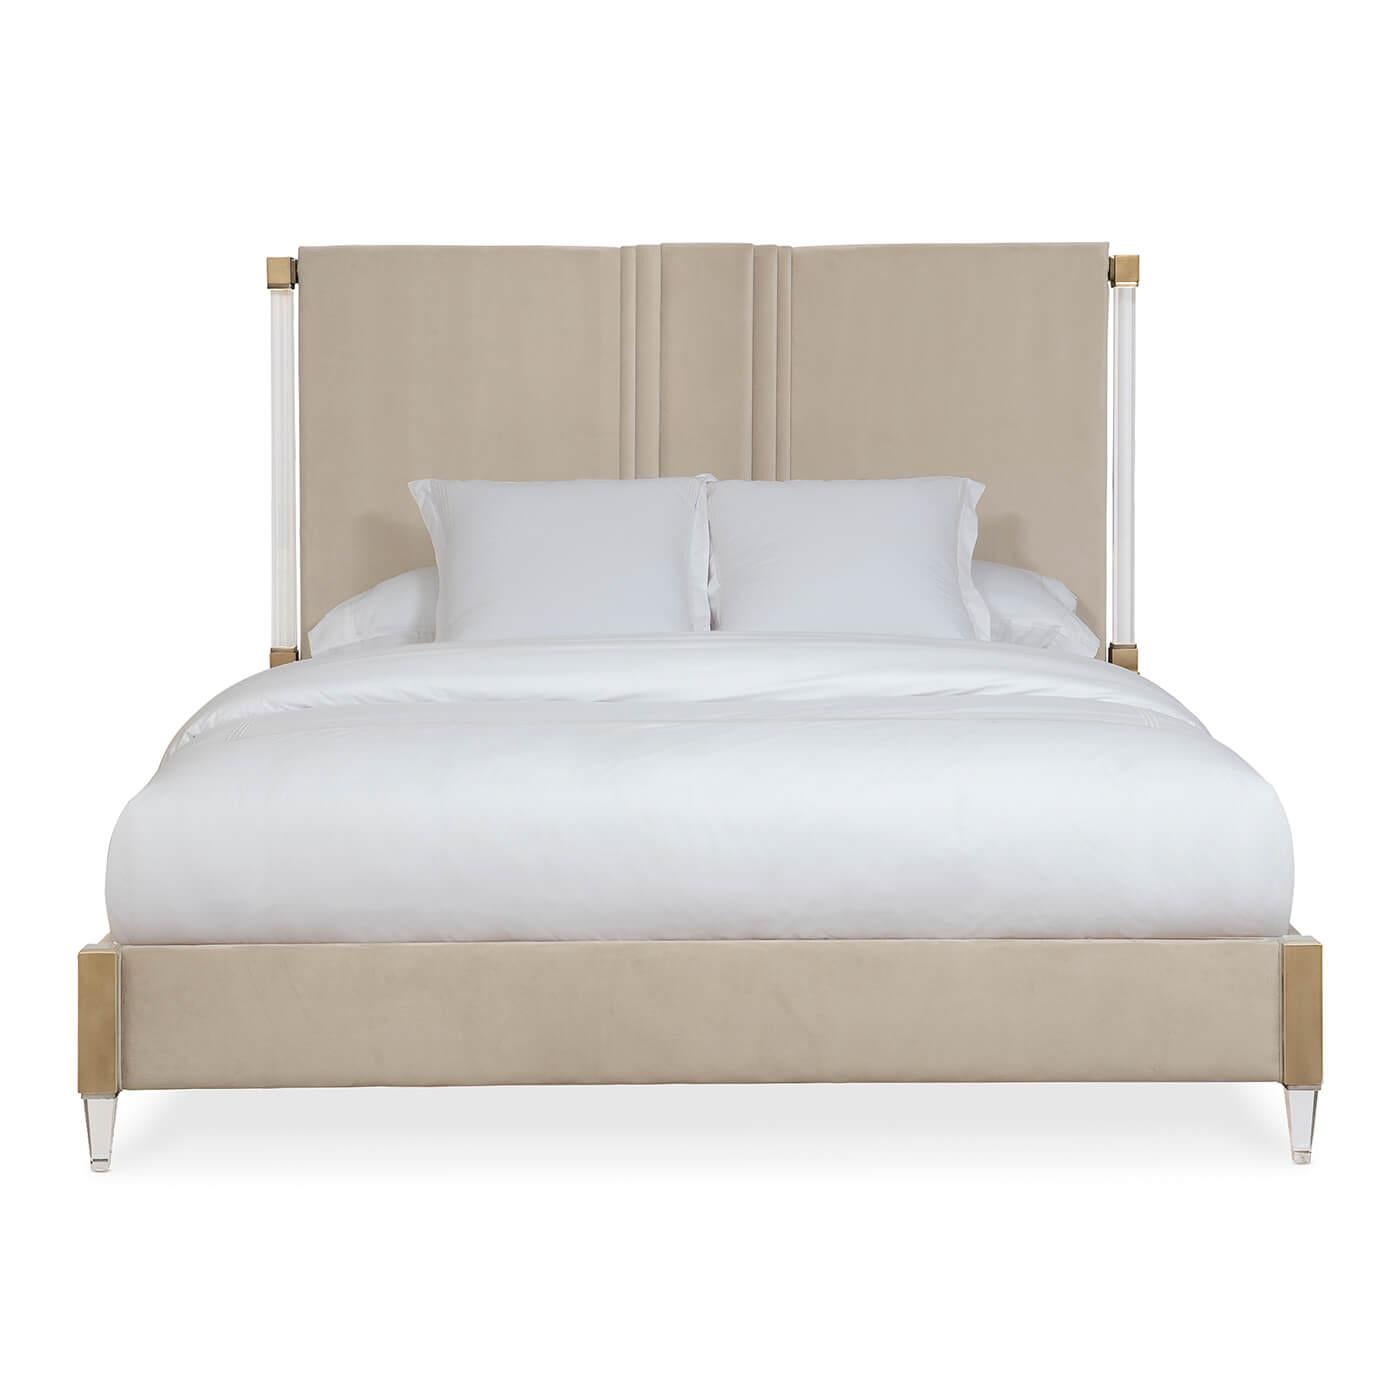 An upholstered king bed with lucite and bronze accents. This beautiful bed is upholstered with luxury fabric in the softest shade of sand. The base of the headboard and footboard are detailed with smoked bronze accents. The head posts and front feet